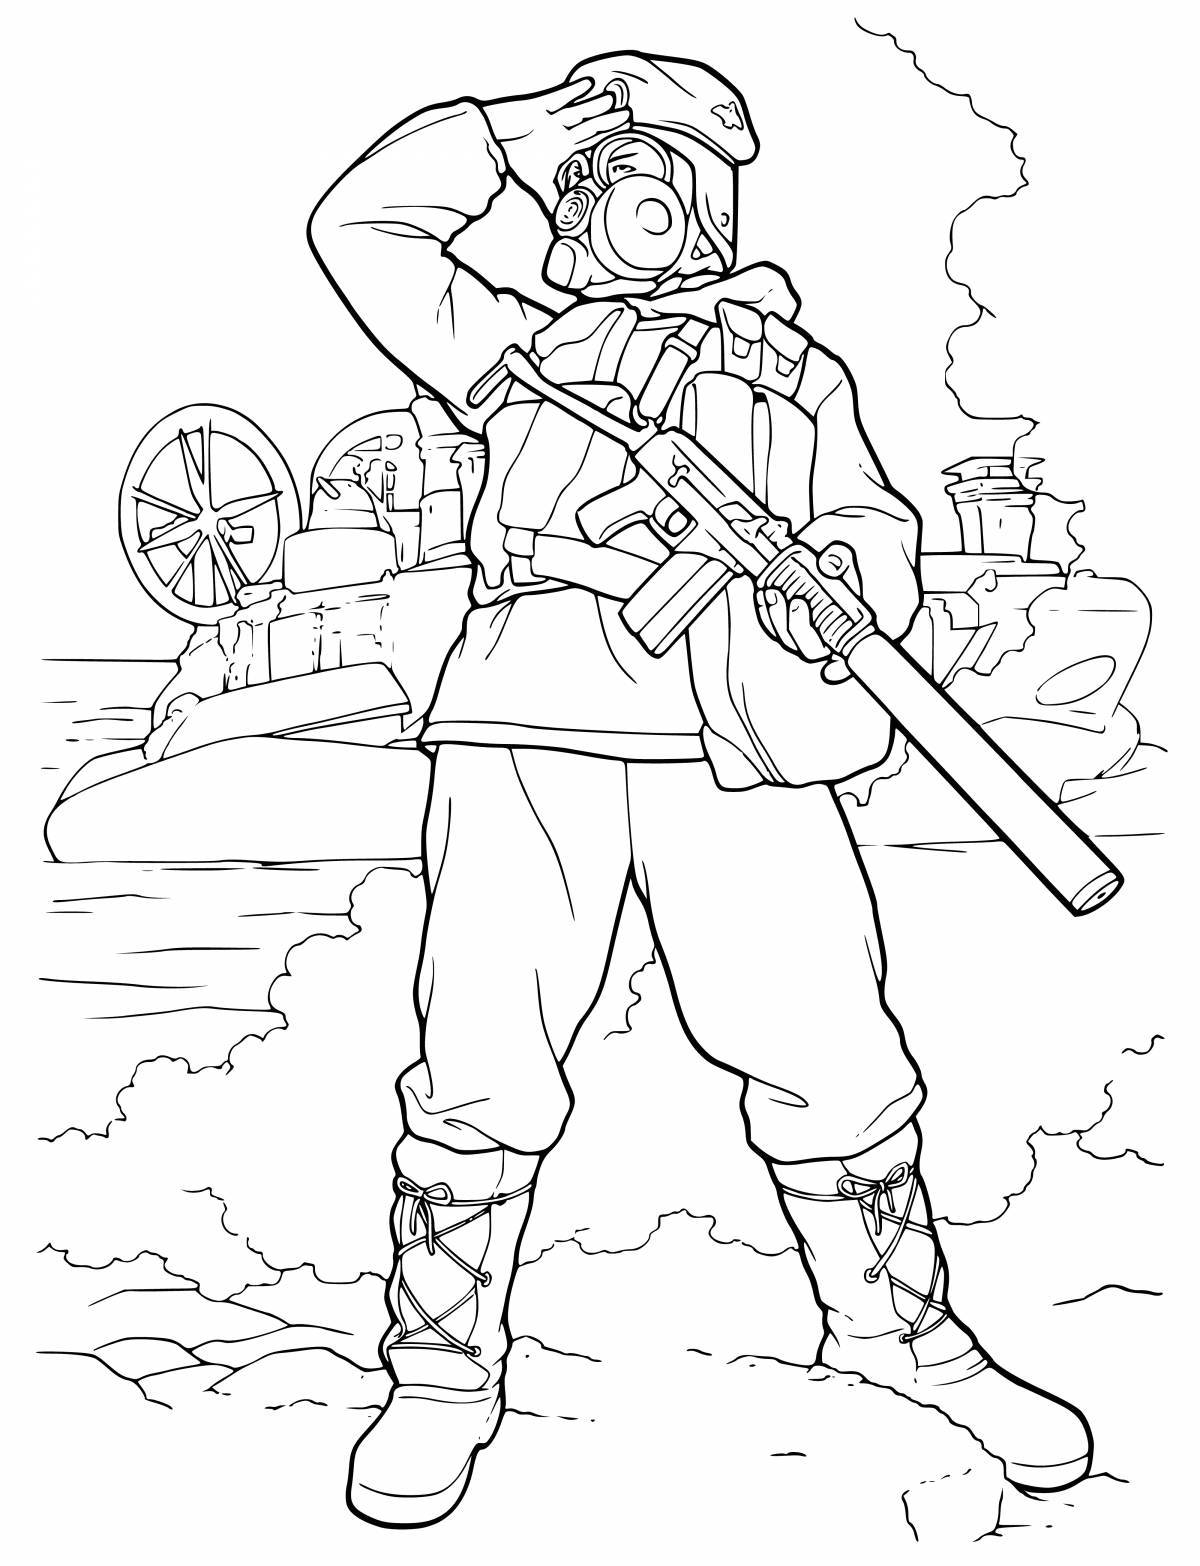 Undefeated soldier coloring page